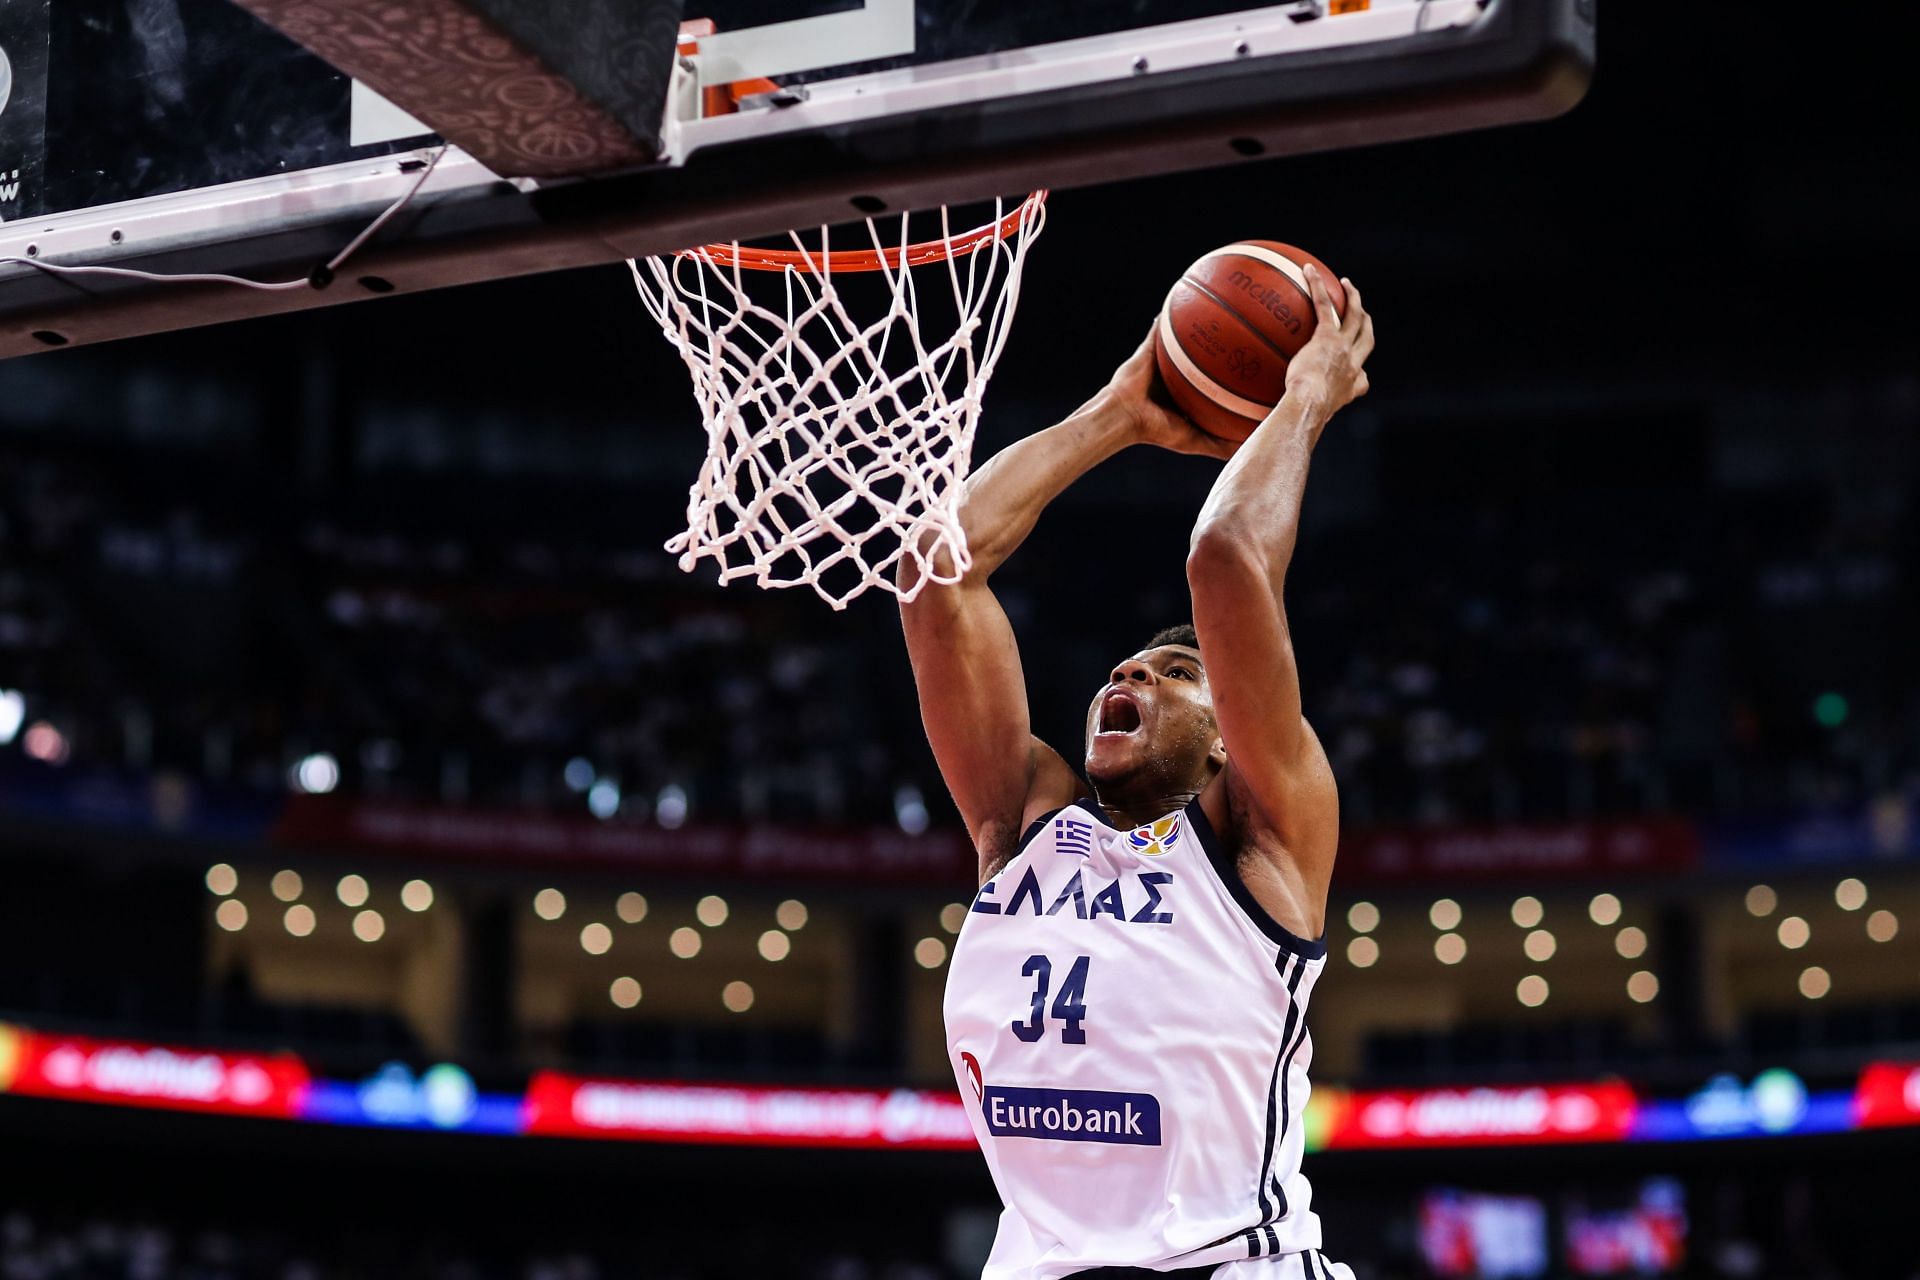 Giannis Antetokounmpo in action at the FIBA 2019 World Cup